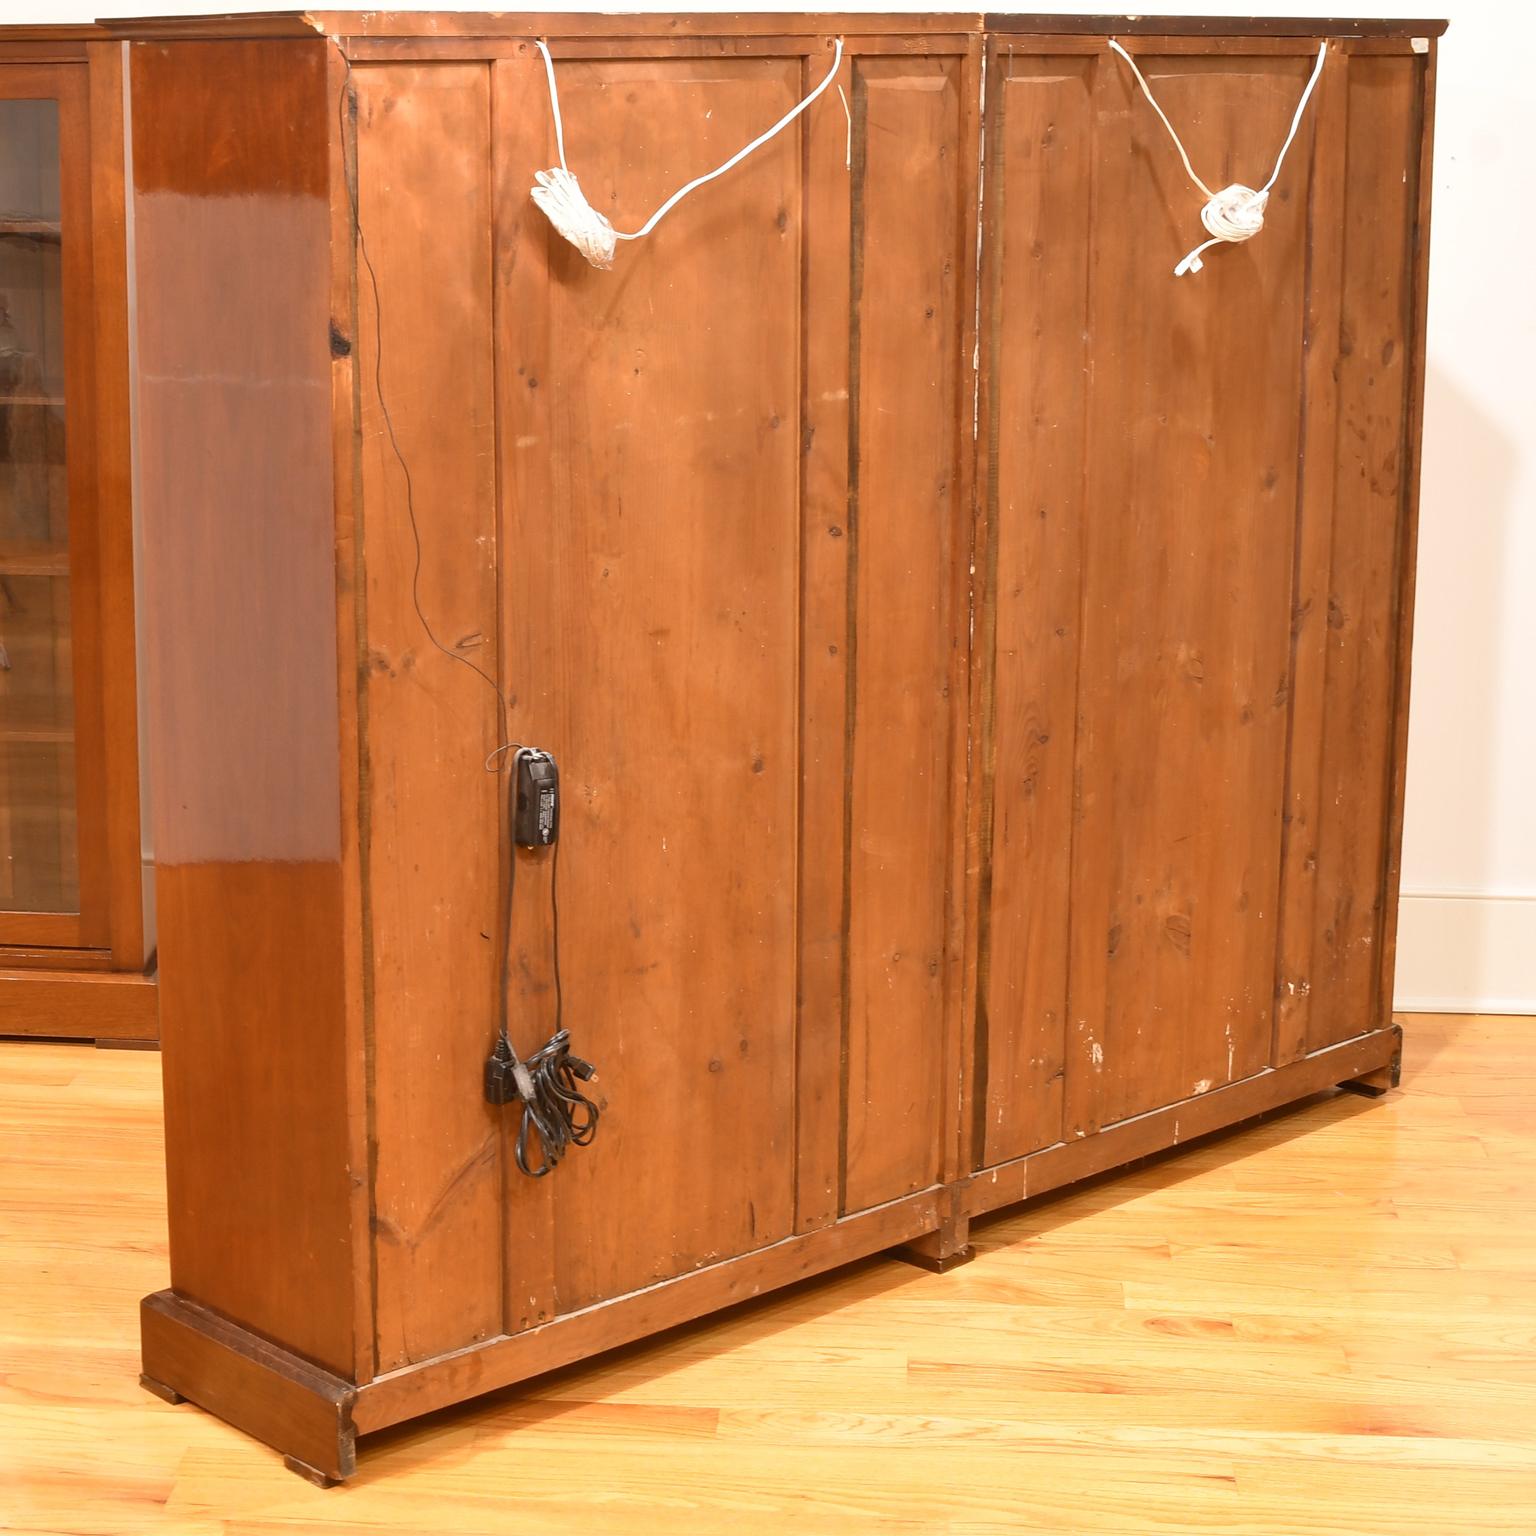 Pair of Art Deco Bookcases in Mahogany with Glass Paneled Doors, Denmark, c 1920 1